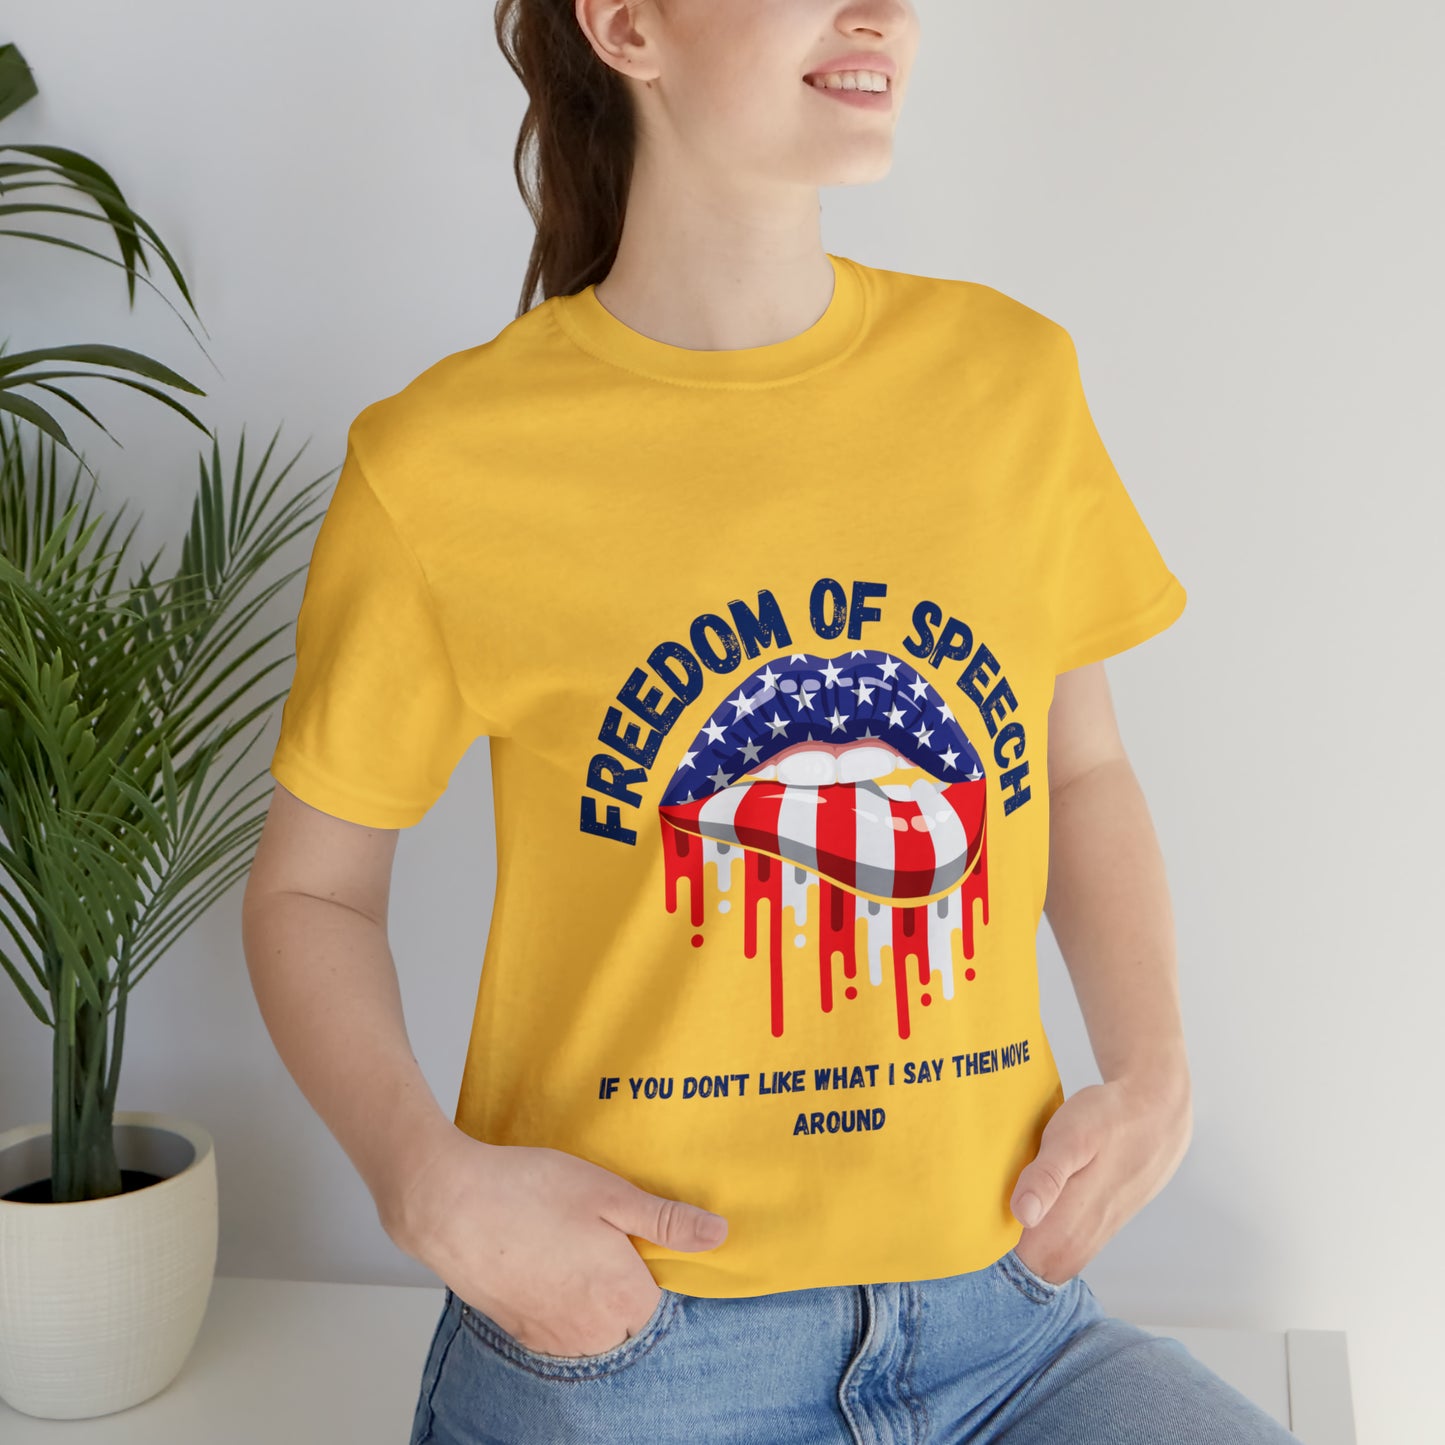 INDEPENDENCE DAY, Freedom of Speech, Jersey Short Sleeve Tee